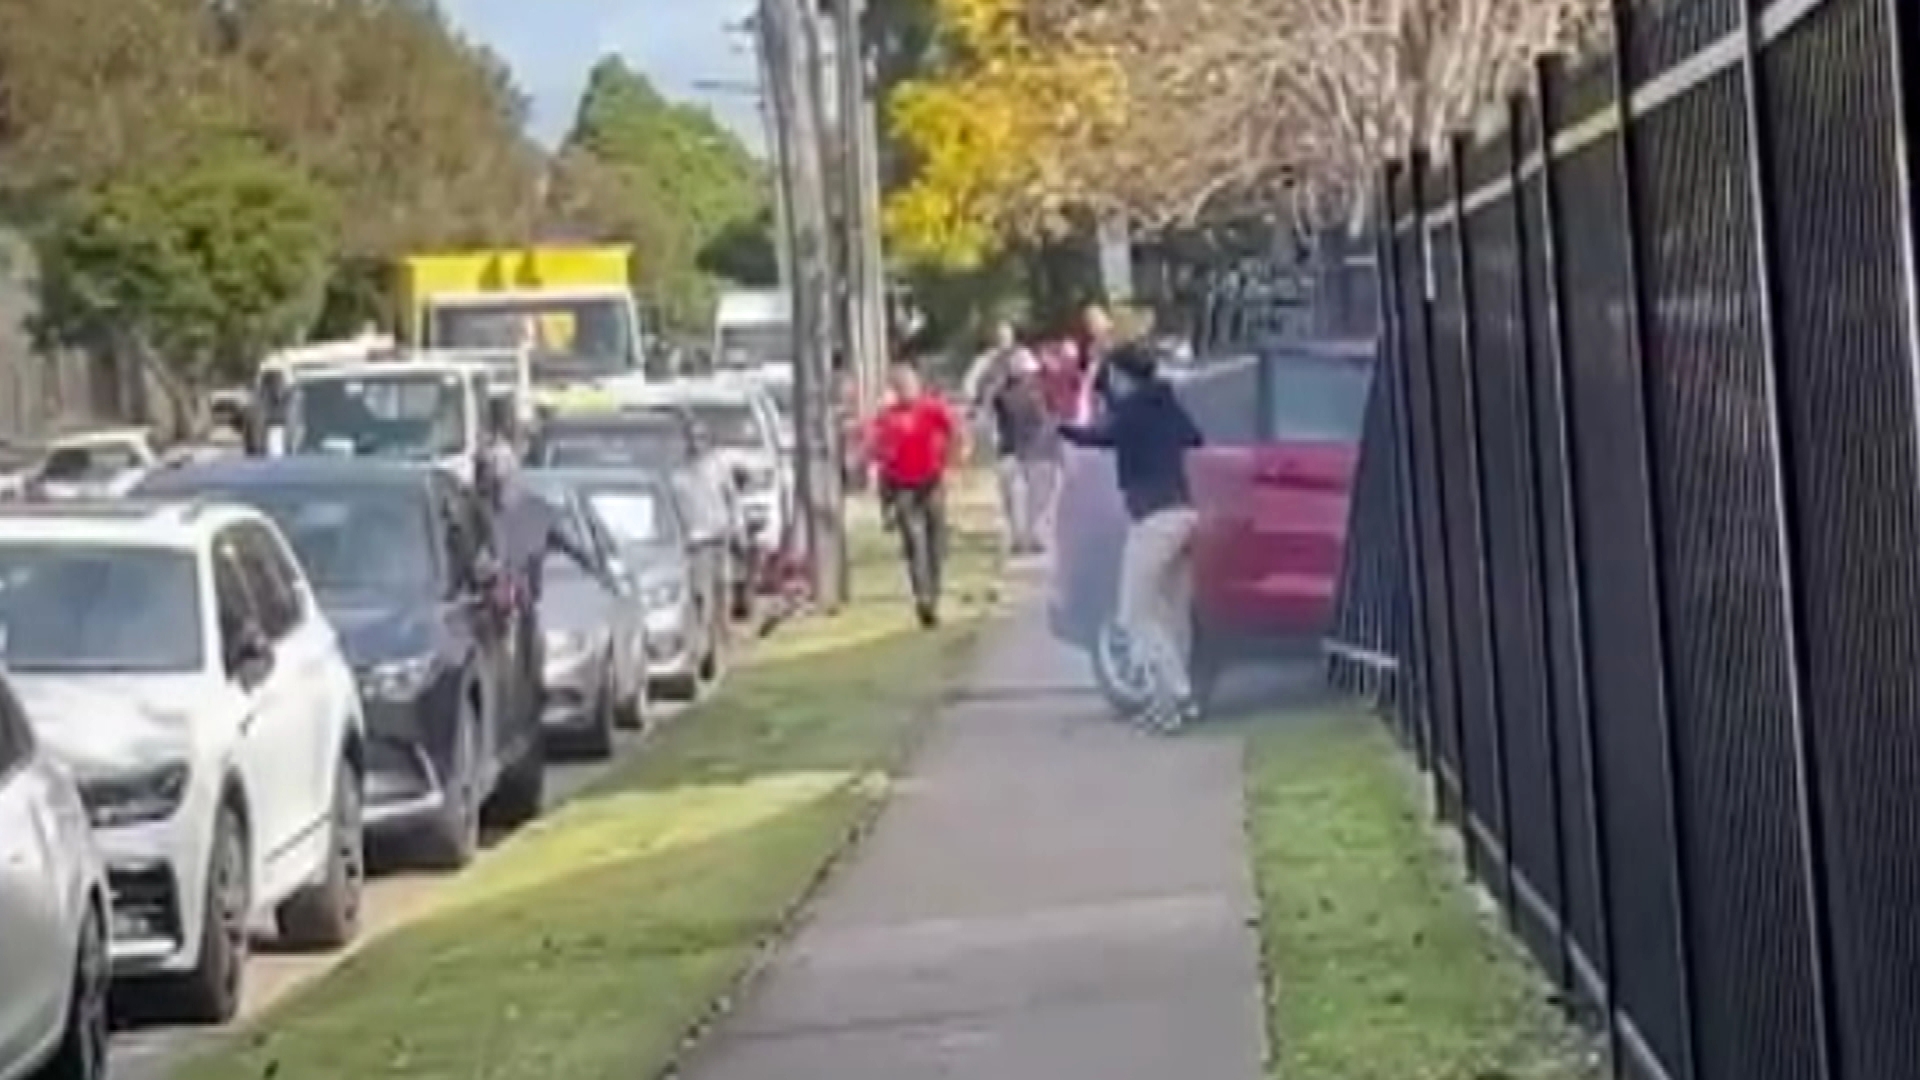 NSW Police chased down an allegedly stolen car before it crashed twice, which forced armed locals to run out of the way, in Sydney's west this afternoon.